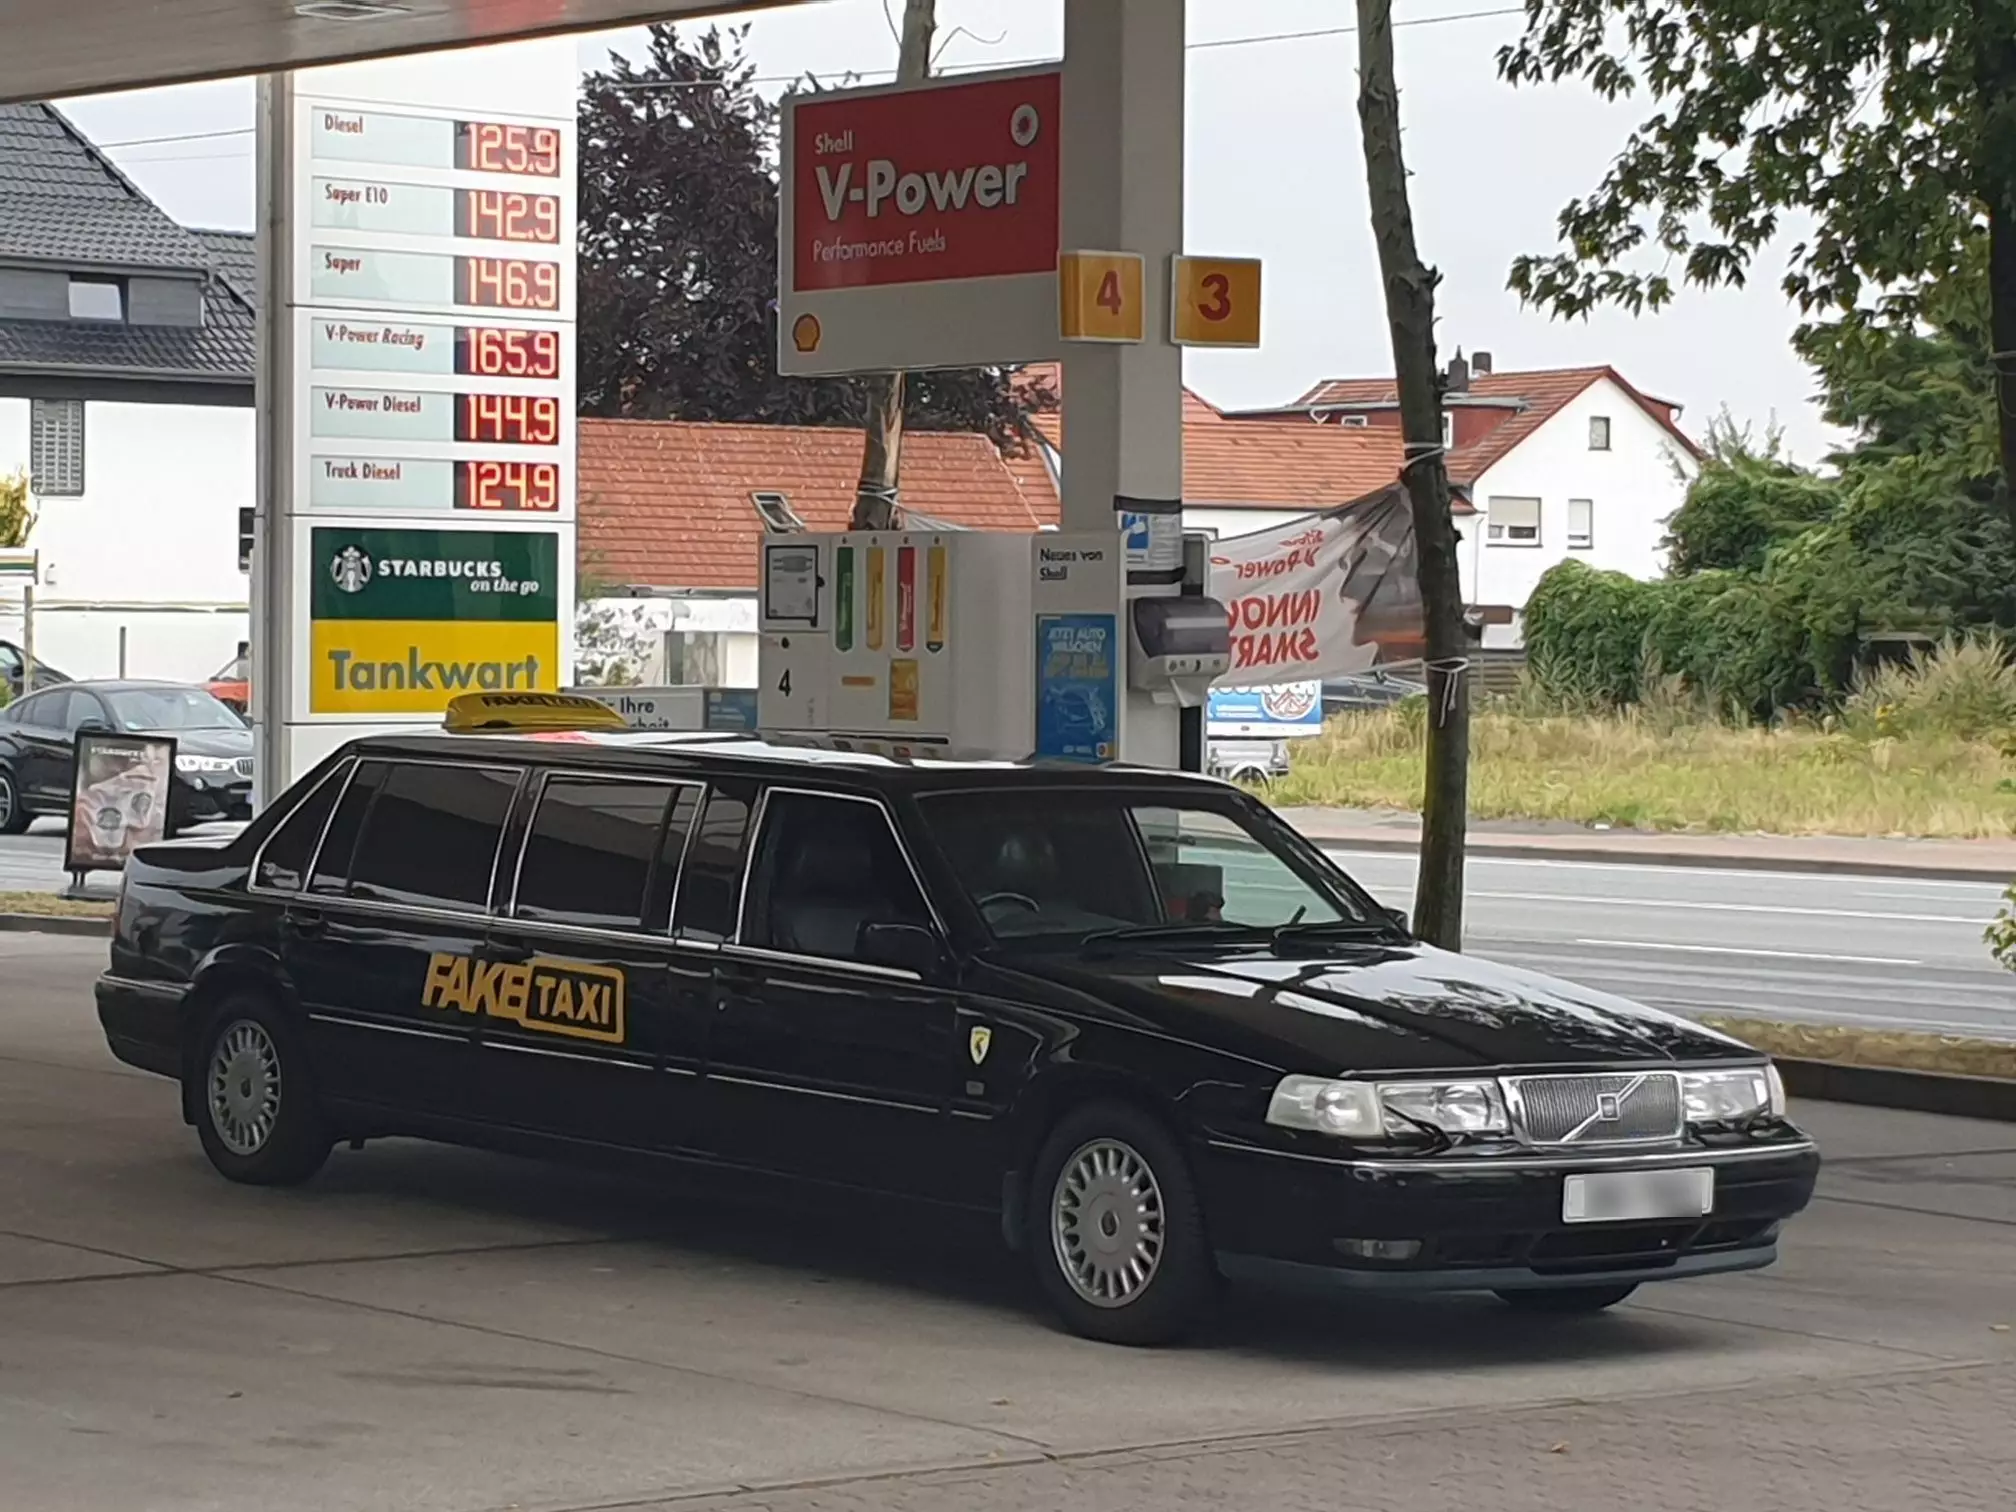 And the real Fake Taxi has said it's interested in adding the bespoke limo to its fleet of cars.